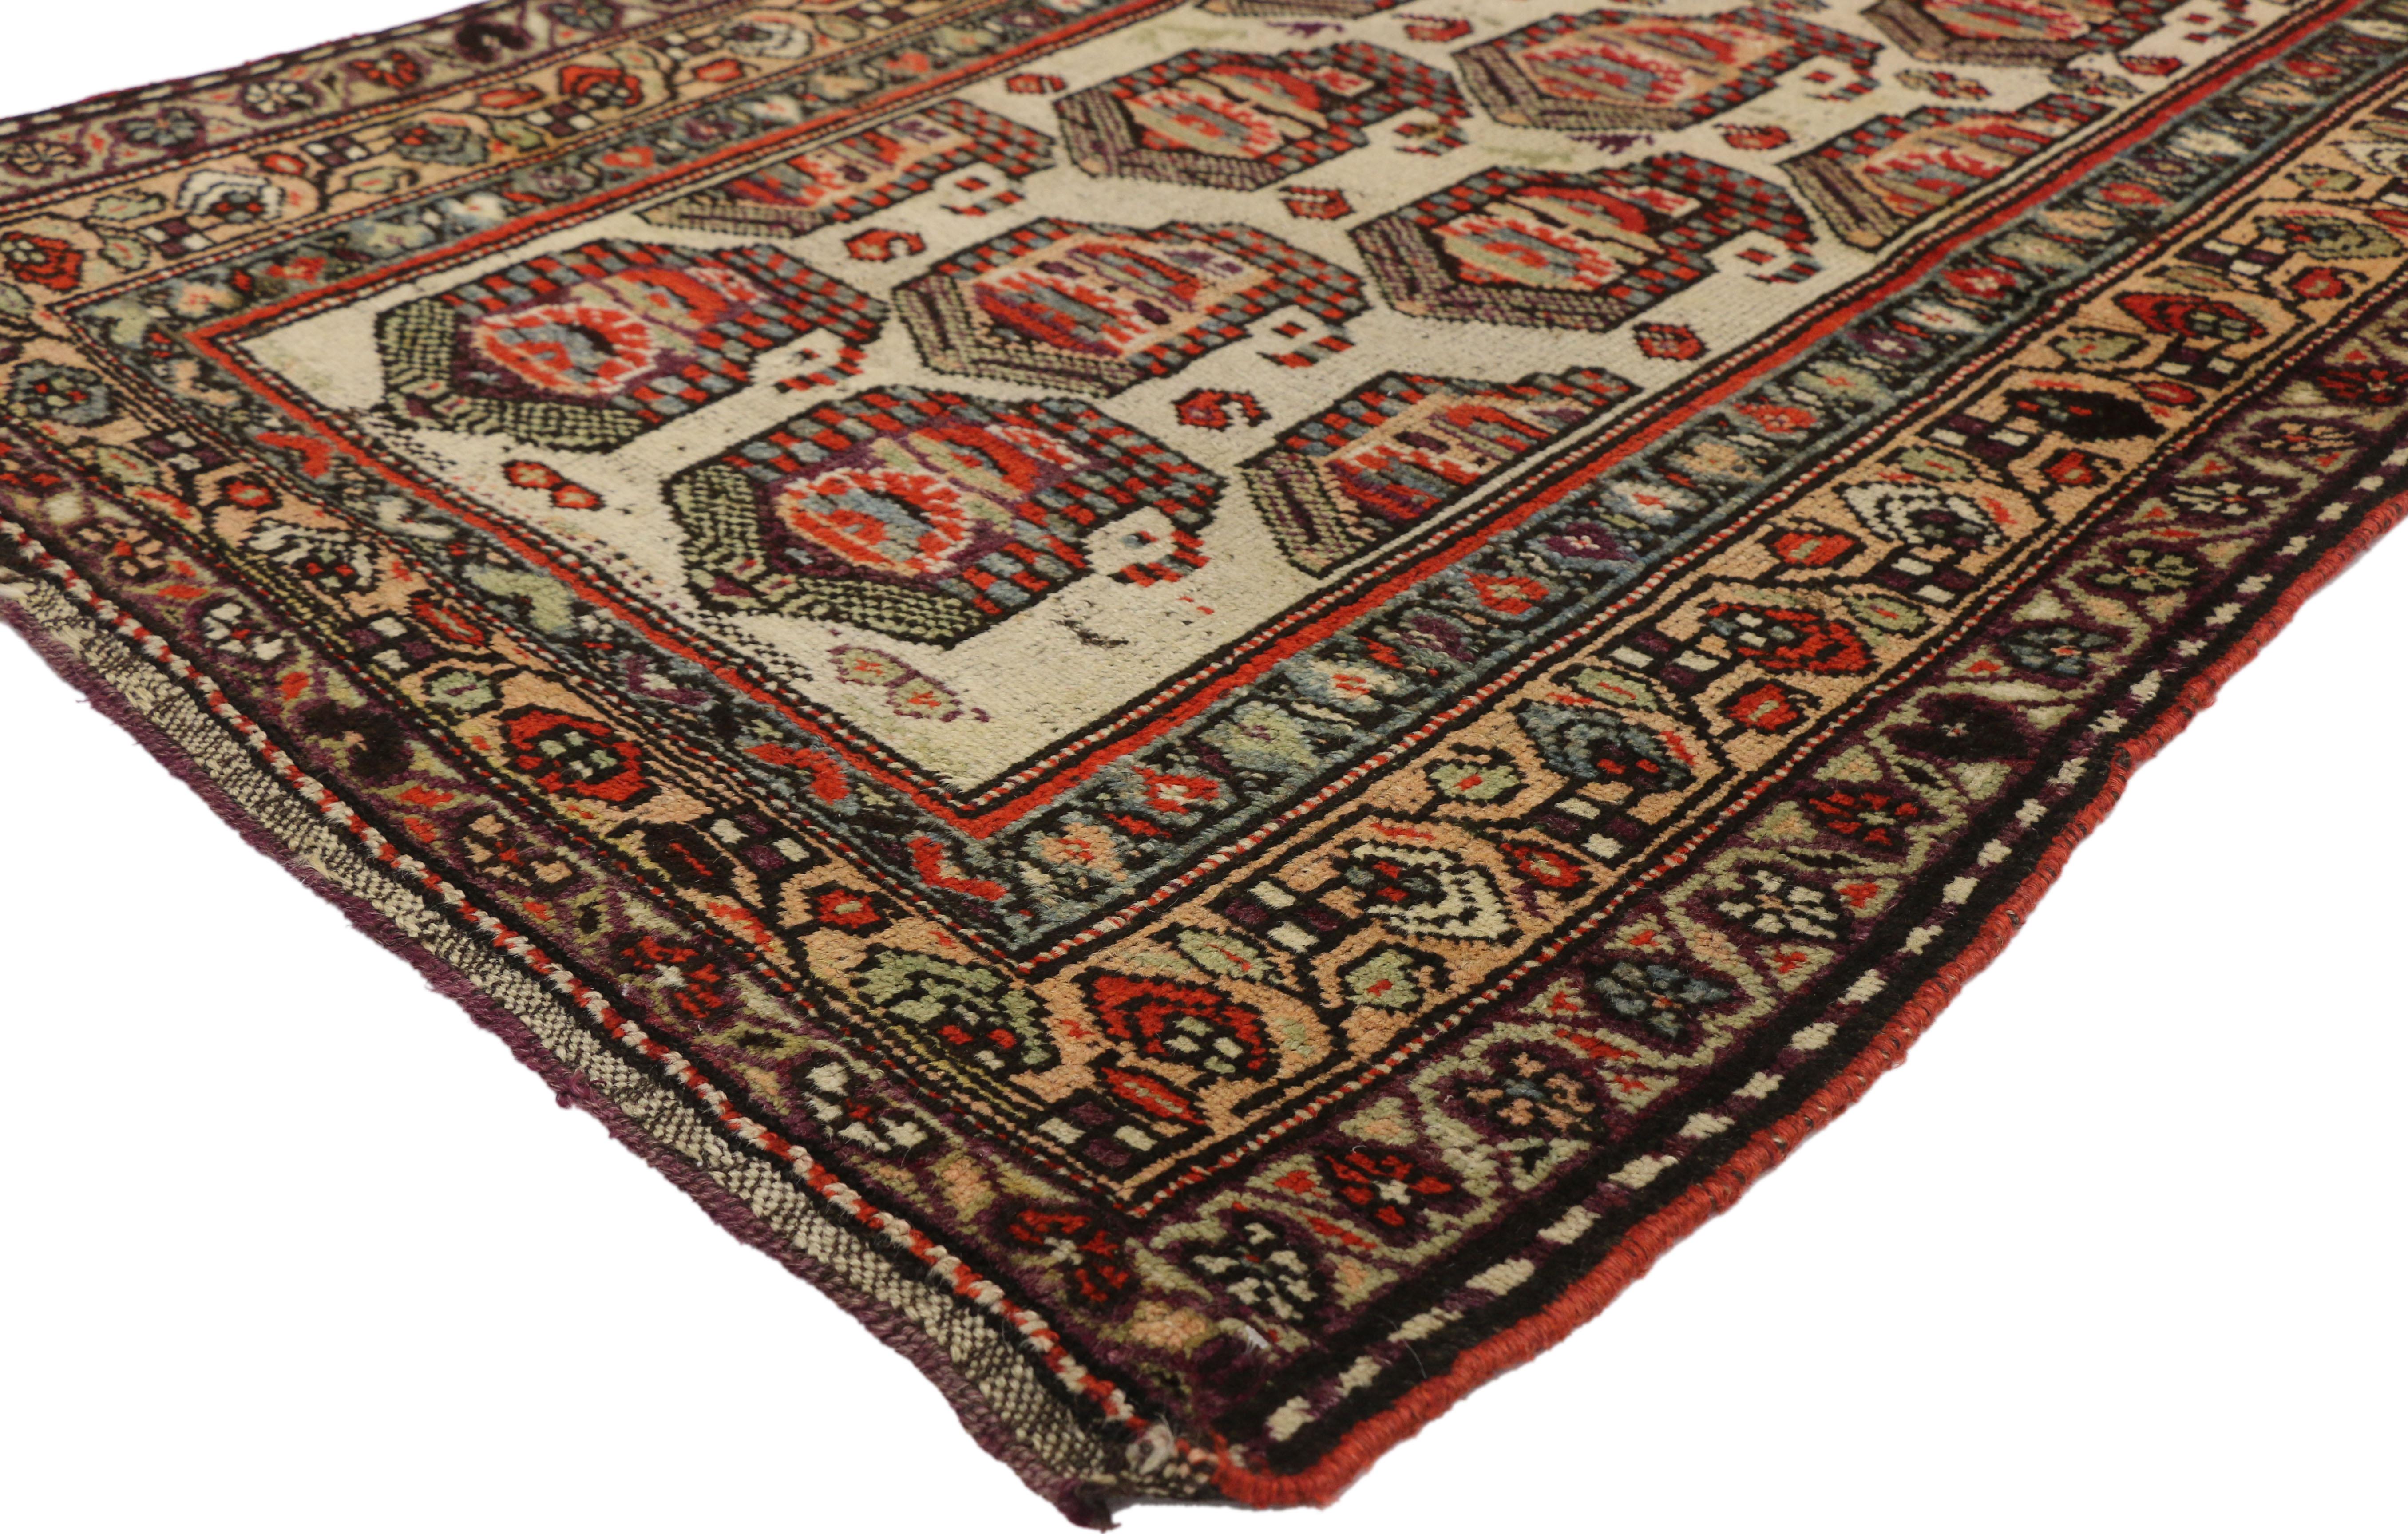 72613, antique Kurdish Persian Accent rug with boteh pattern in traditional style. This hand-knotted wool antique Kurdish Persian accent rug with a traditional style features diagonal rows of large-scale boteh, or paisley motifs. Smaller red boteh